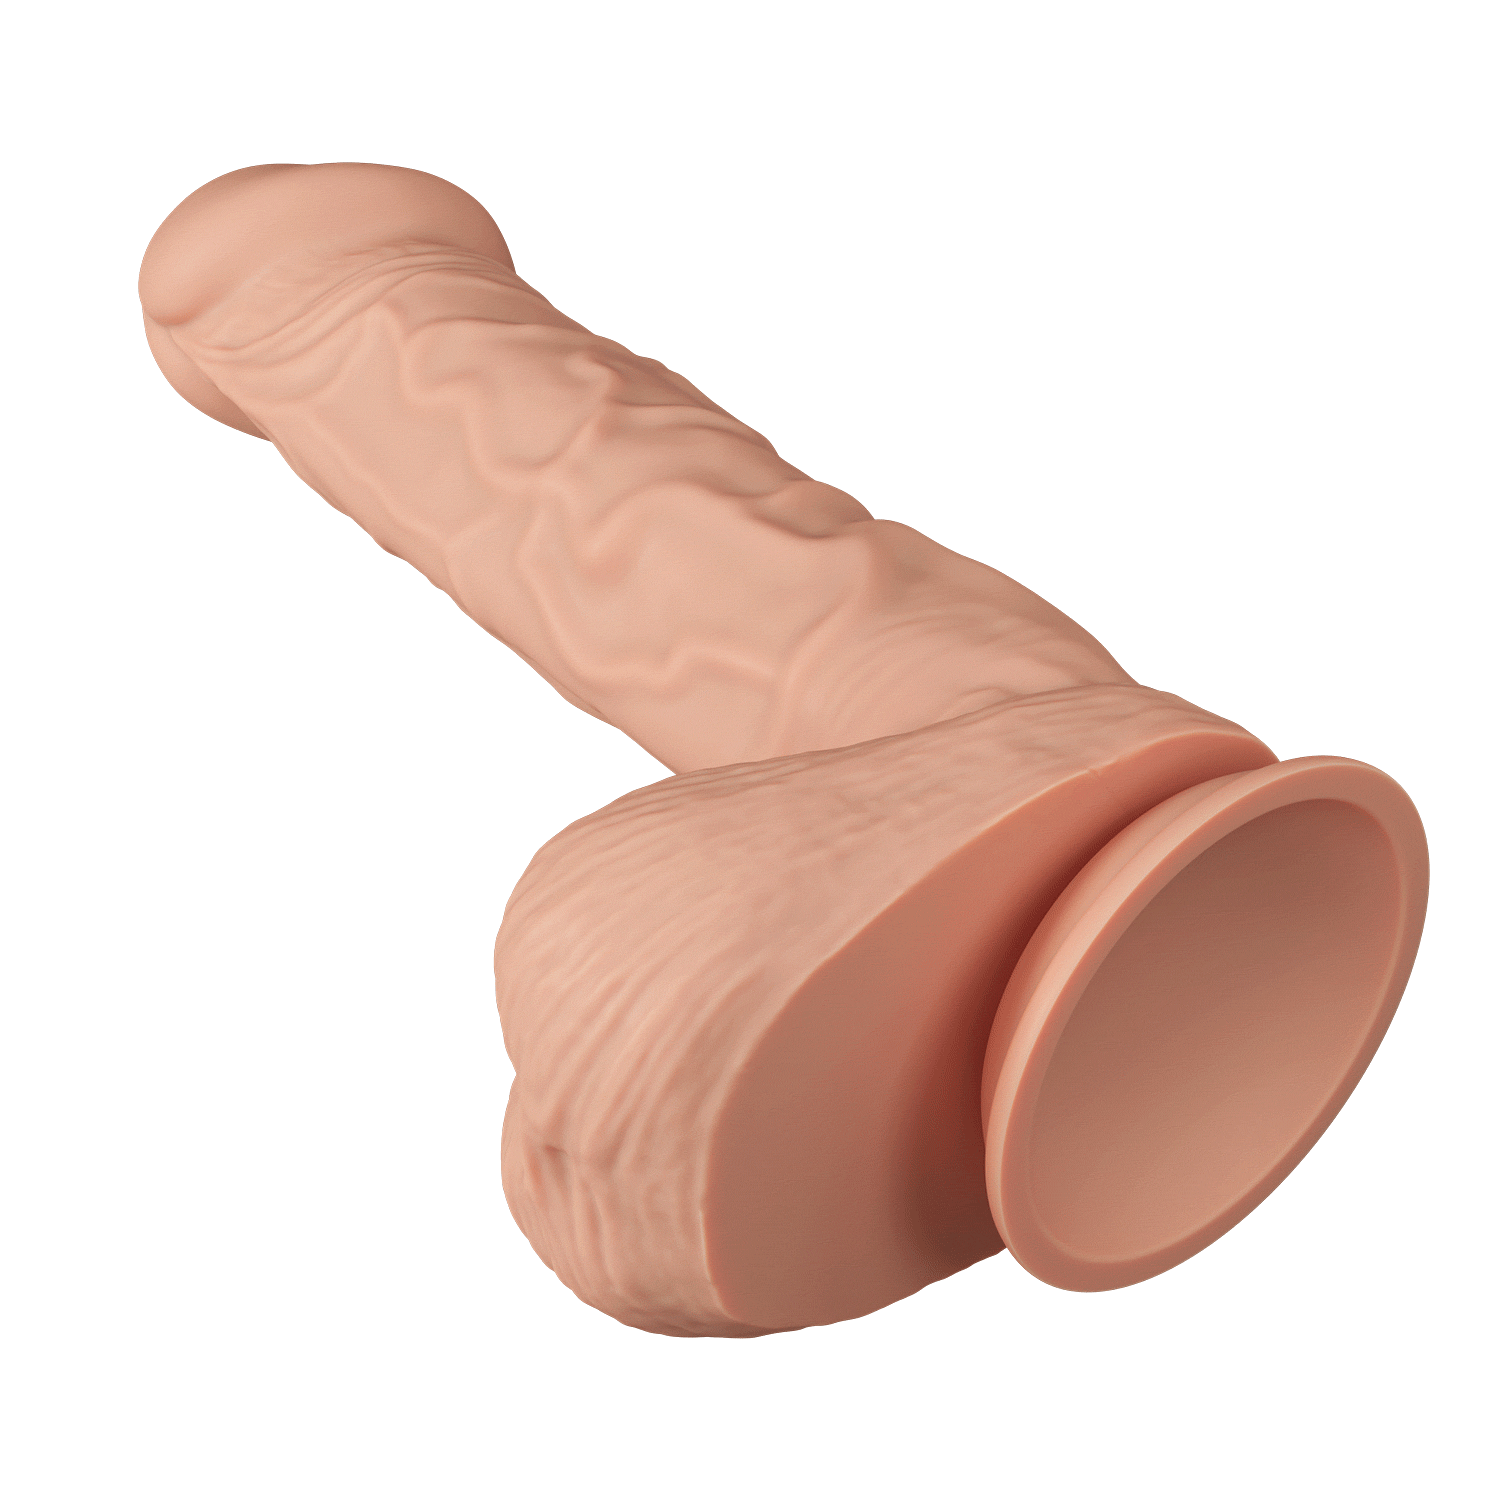 Baile 10.2 Inch Lifelike Dildo with Suction Cup in Flesh